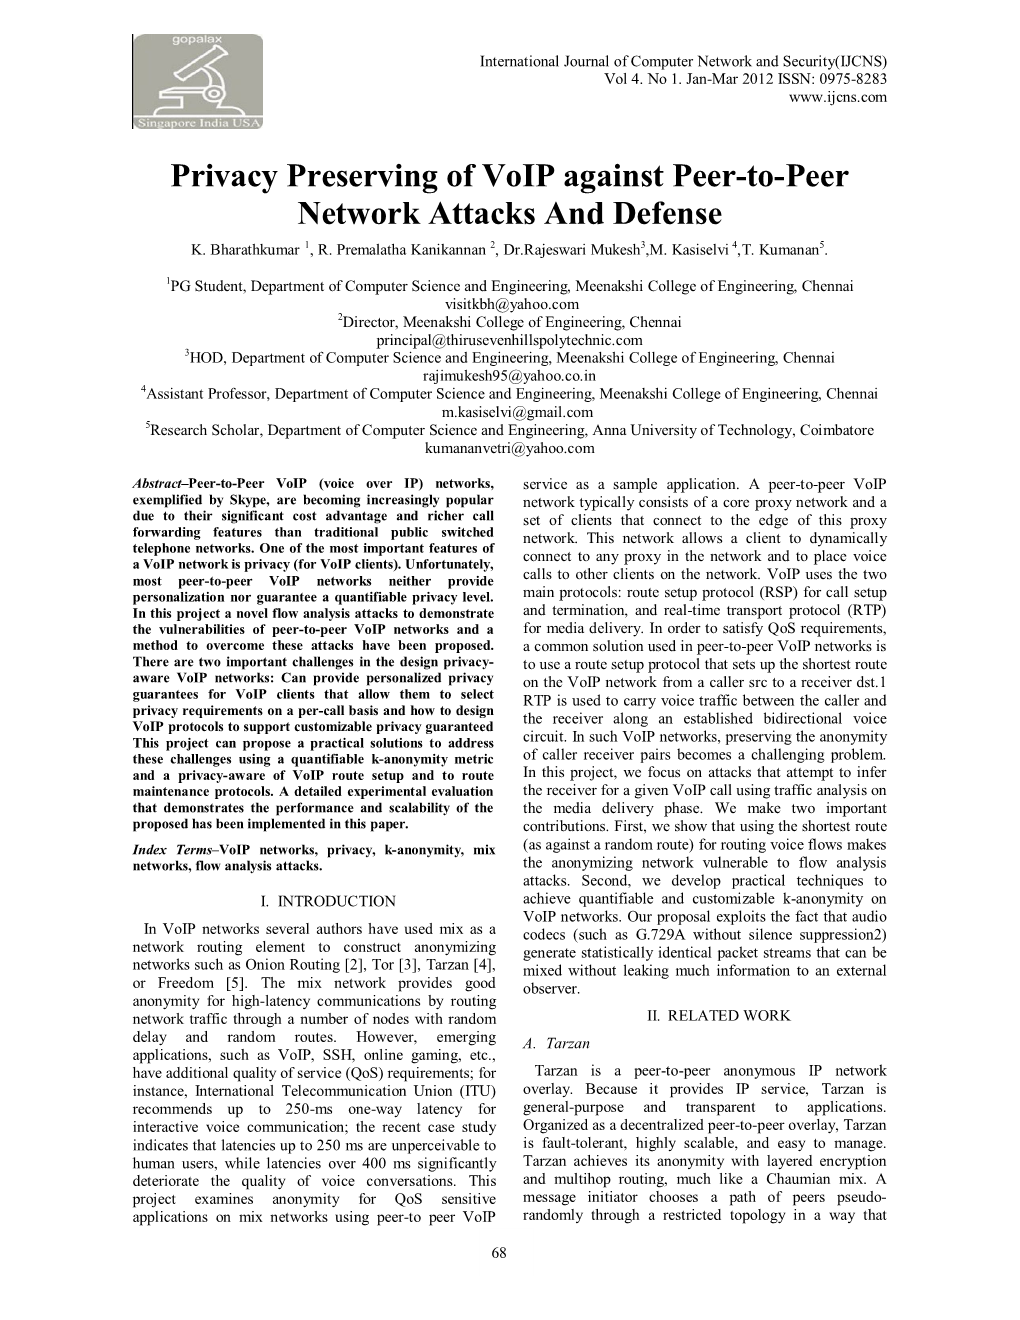 Privacy Preserving of Voip Against Peer-To-Peer Network Attacks and Defense K